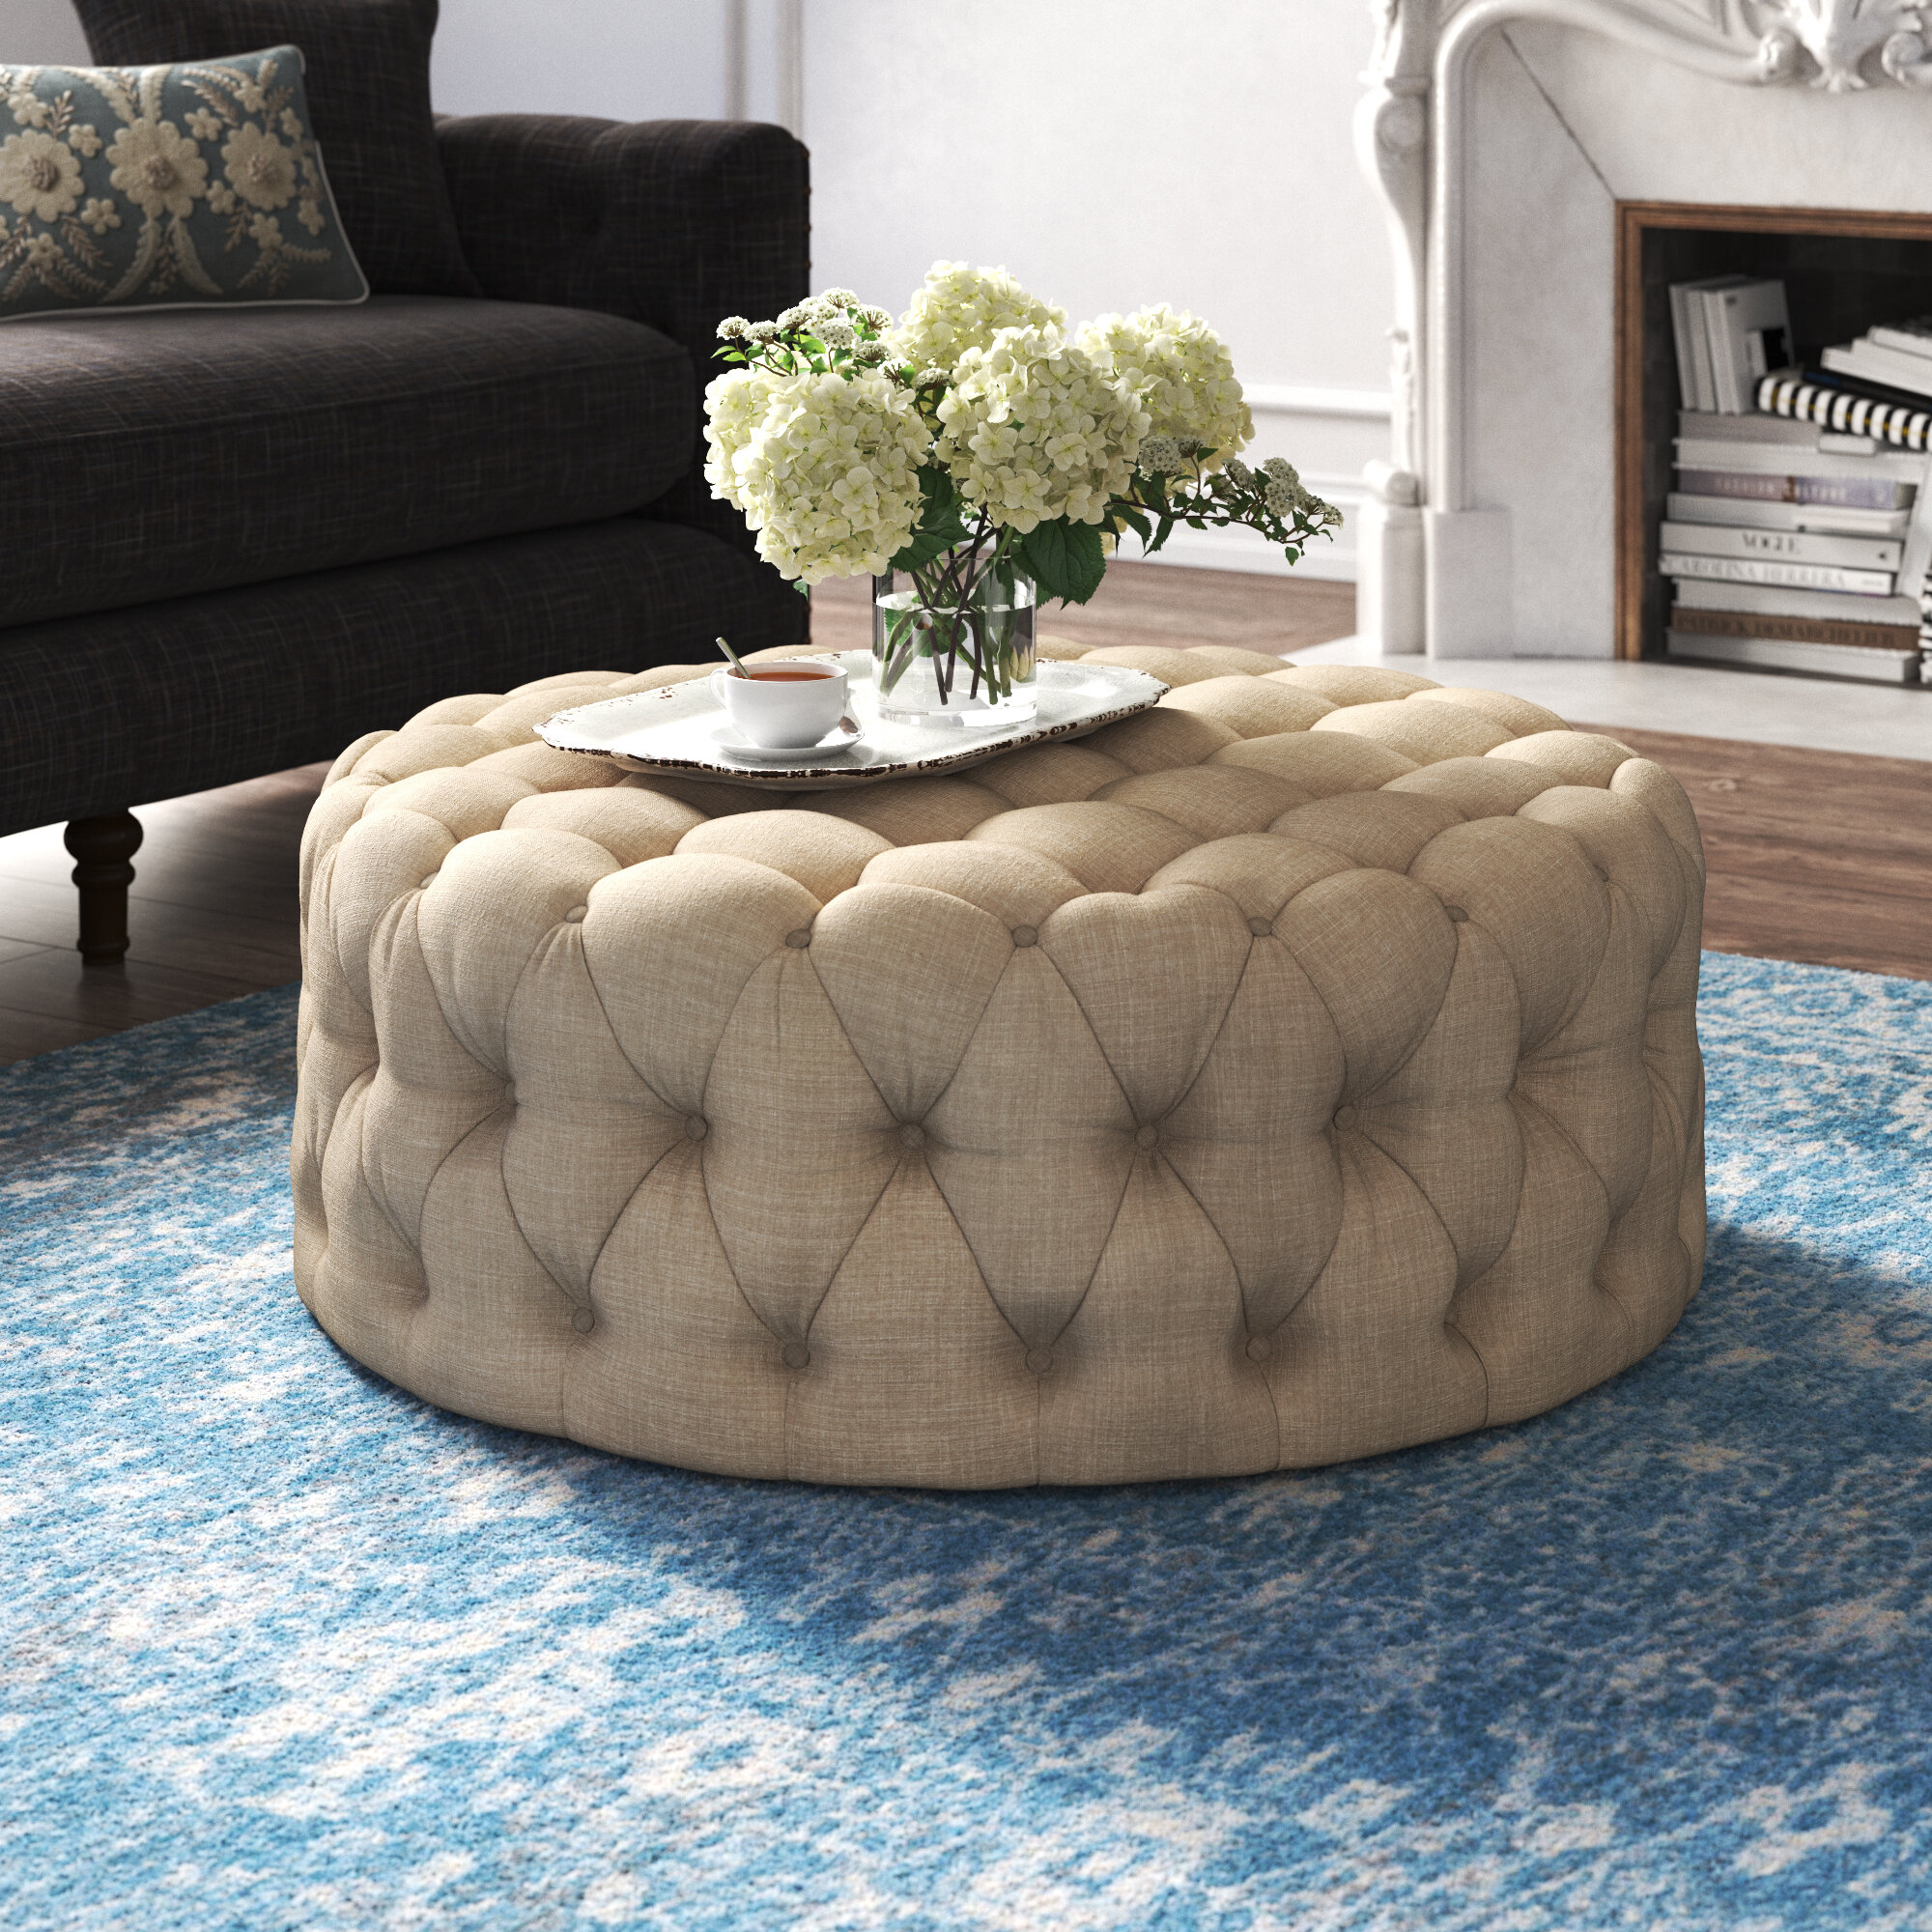 Kelly Clarkson Home Acklen 4173 Wide Tufted Round Cocktail Ottoman Reviews Wayfair